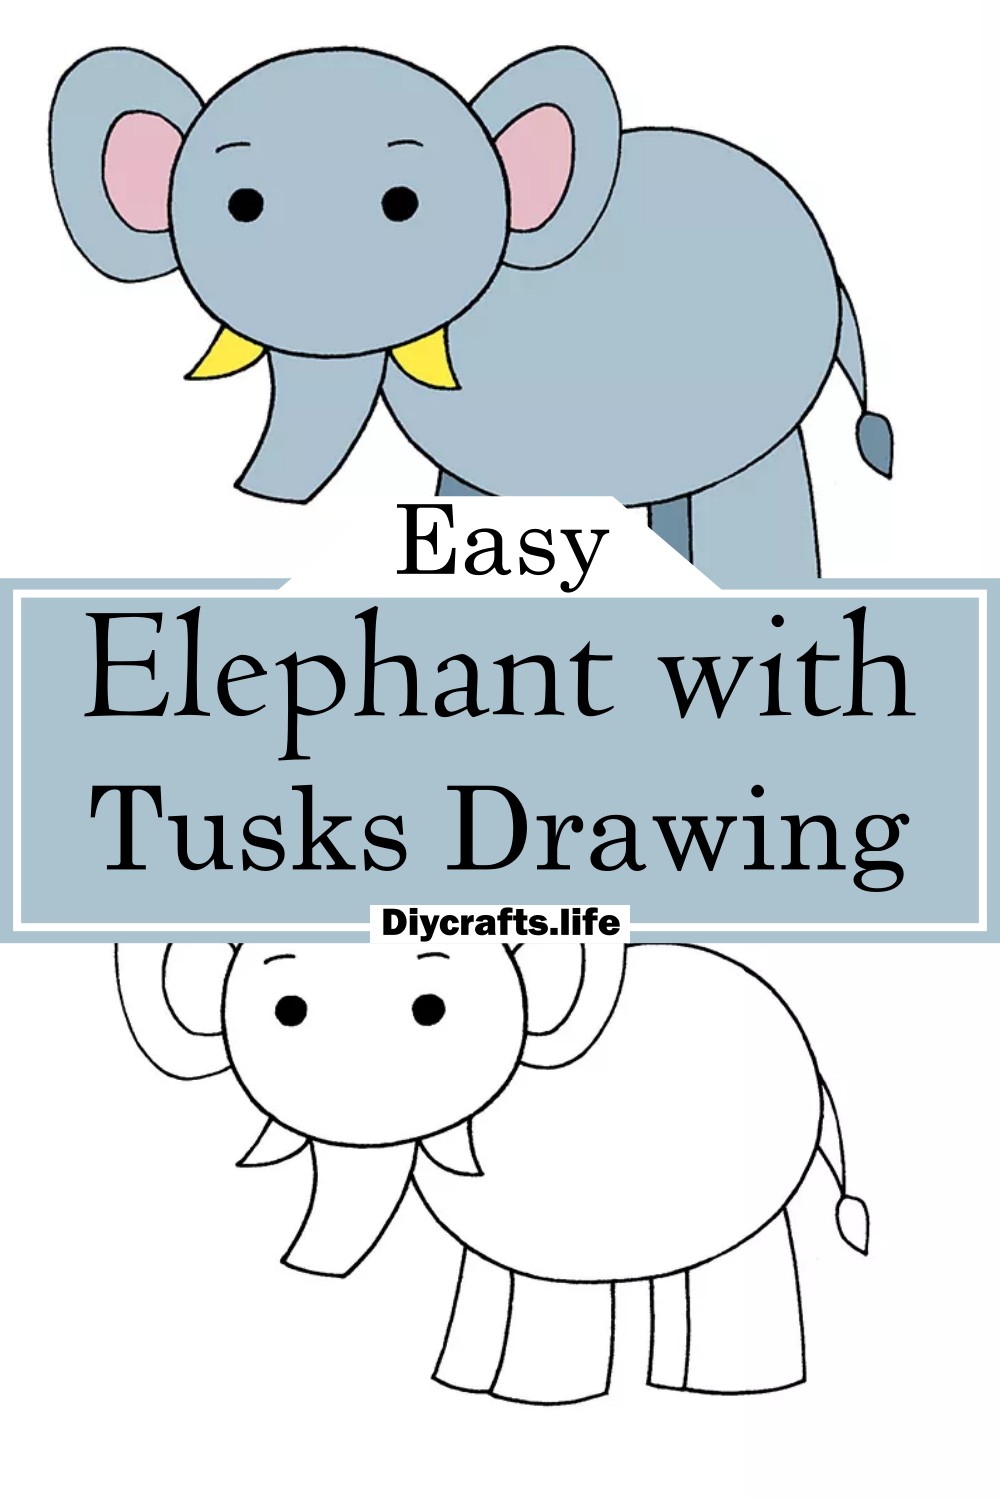 Elephant with Tusks Drawing